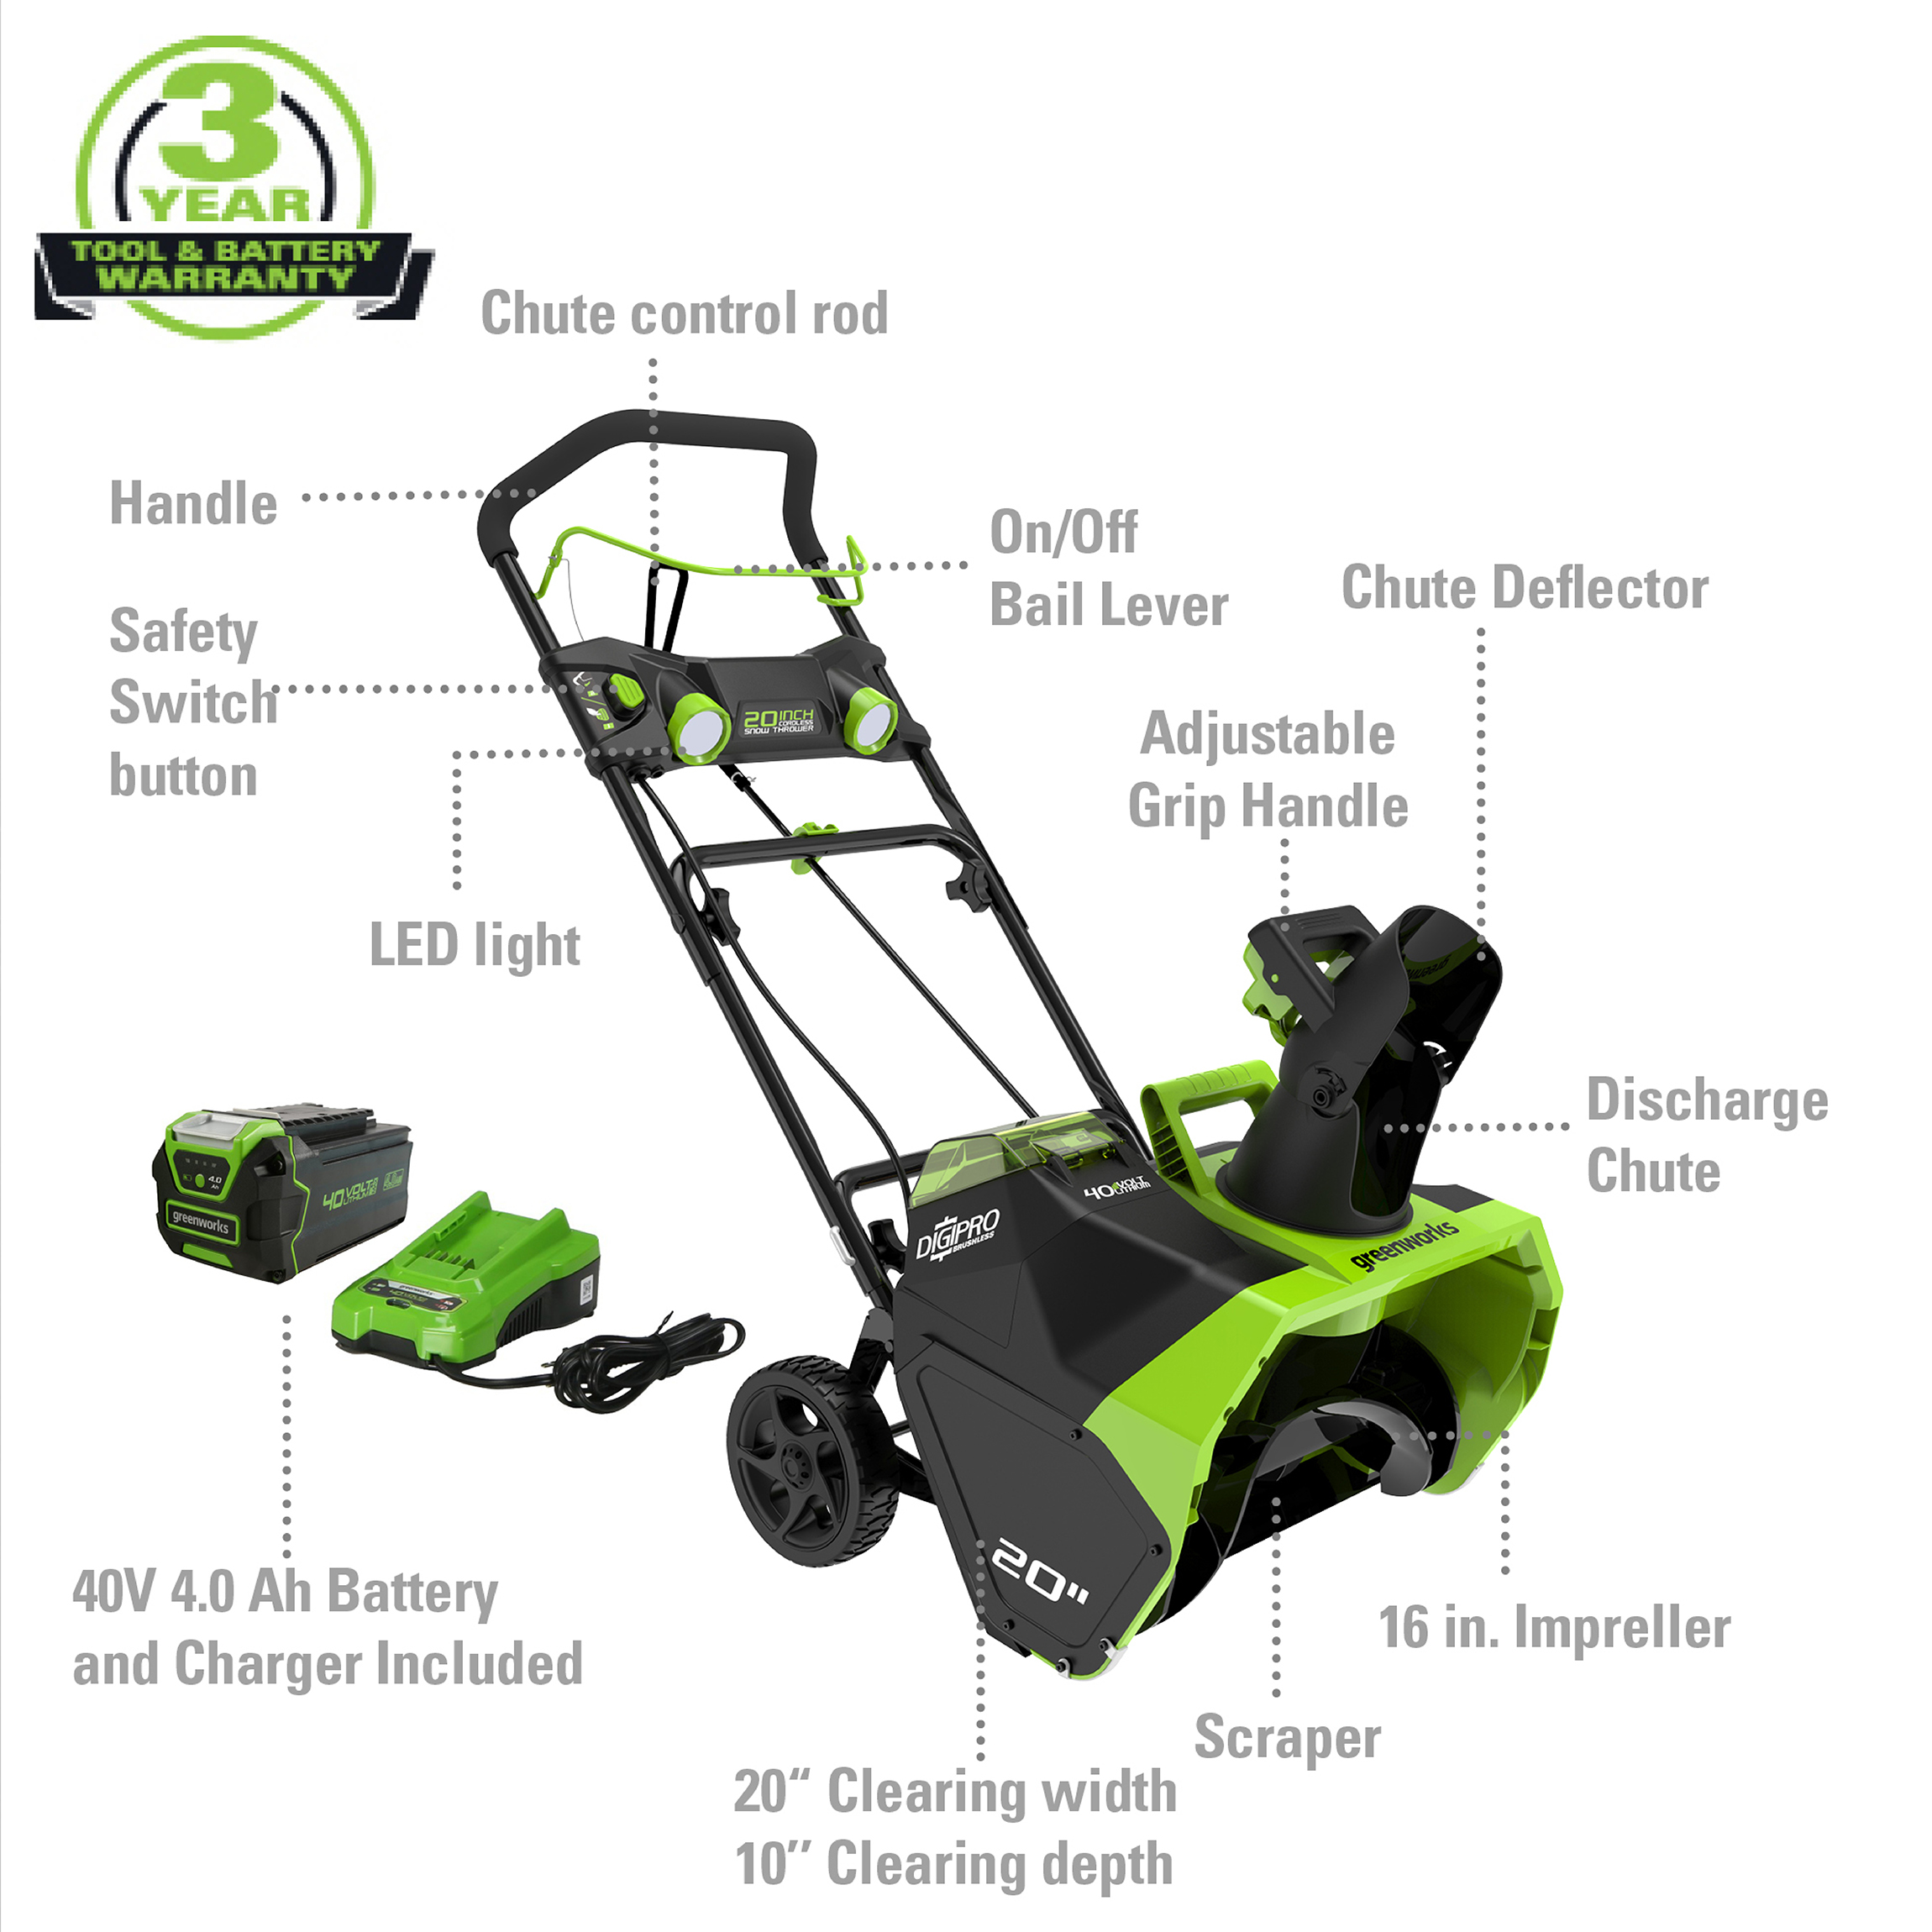 Greenworks 40V 20-inch Cordless Brushless Snow Blower with 4.0 Ah Battery and Charger, 26272 - image 2 of 9